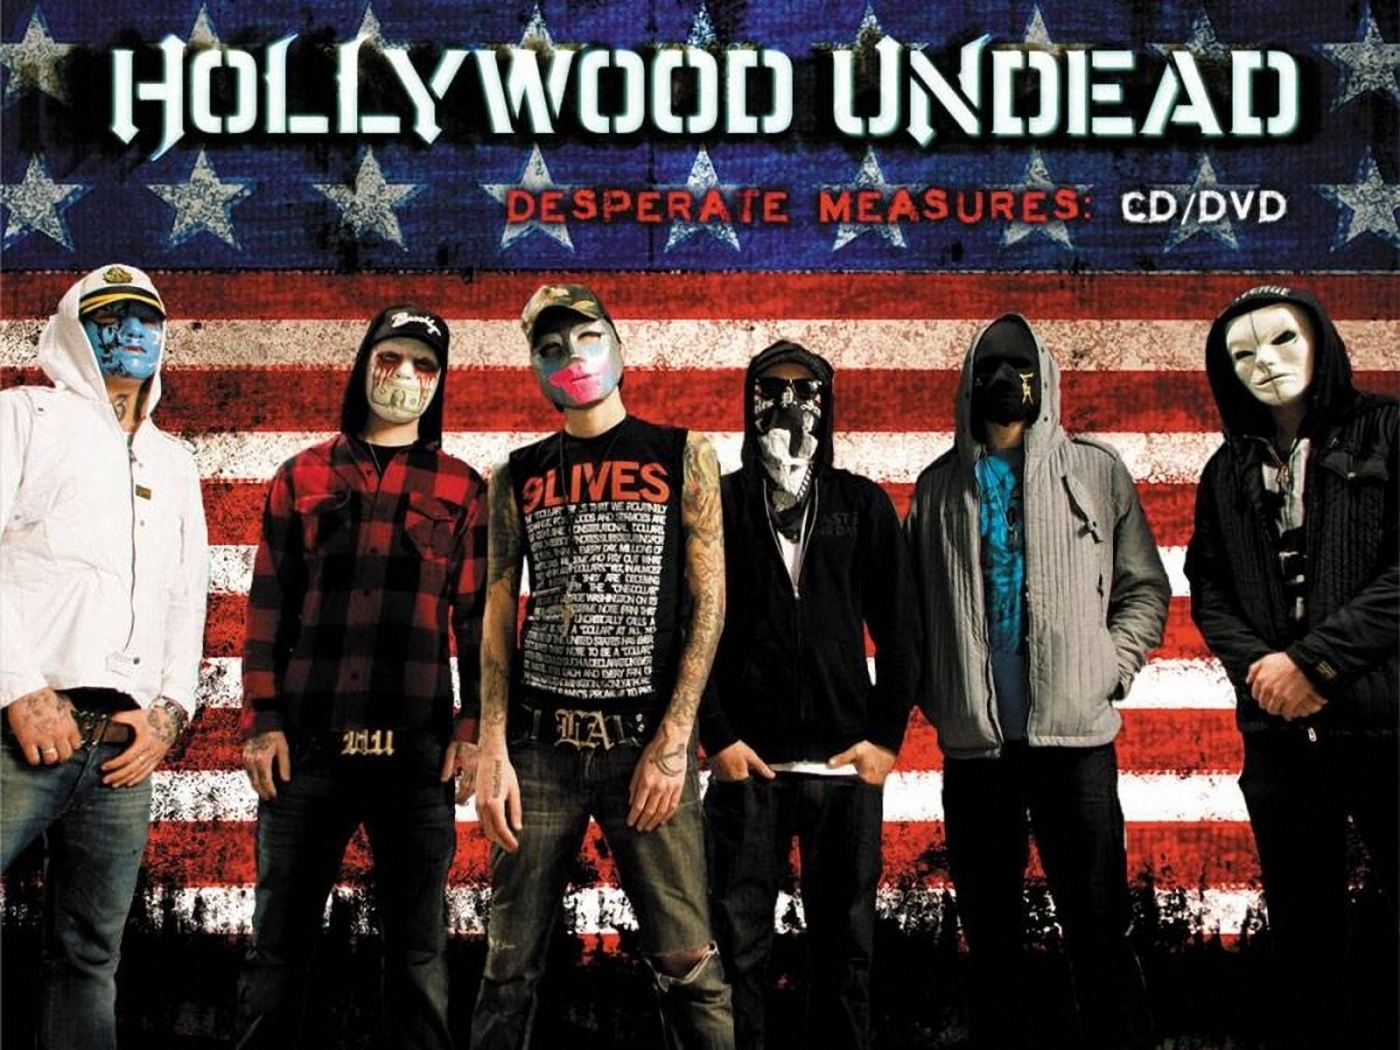 Hollywood Undead Wallpaper Pictures